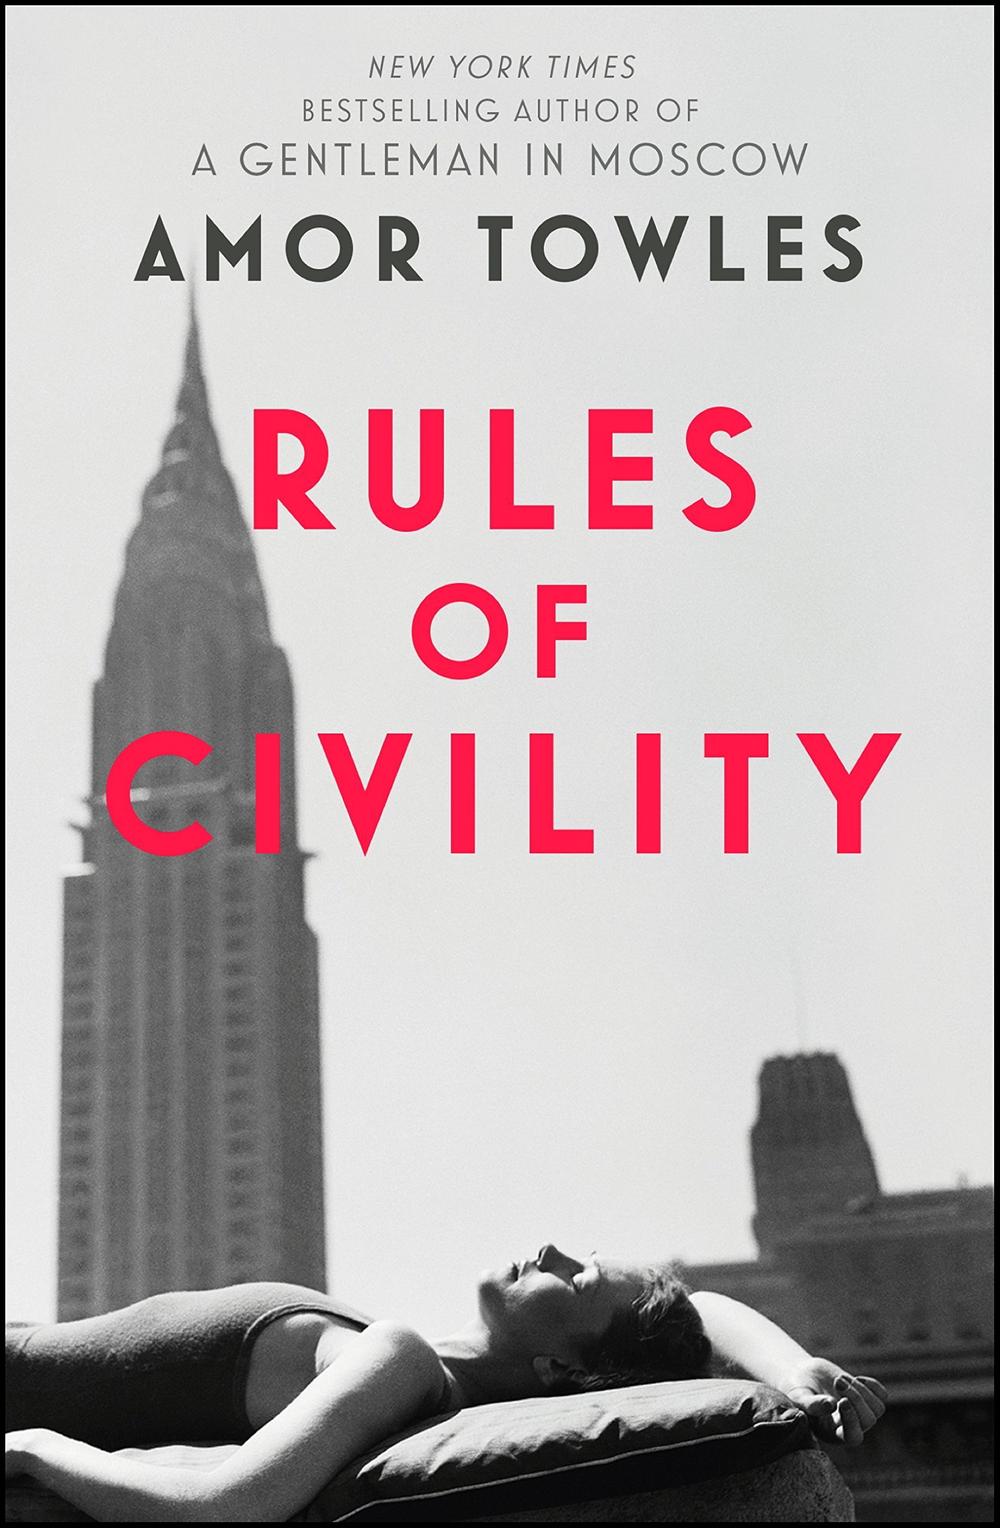 book reviews of rules of civility by amor towles